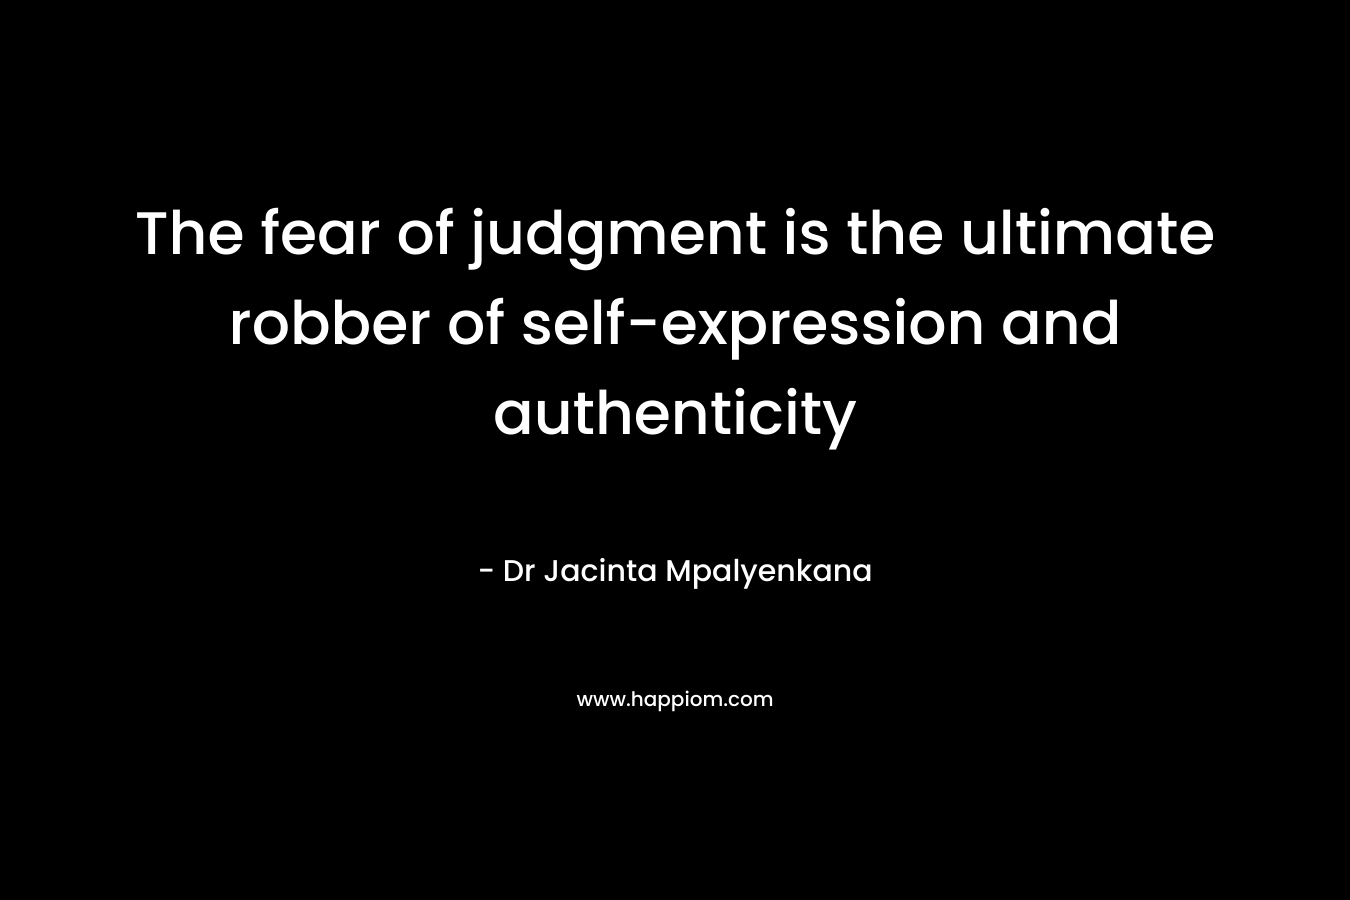 The fear of judgment is the ultimate robber of self-expression and authenticity